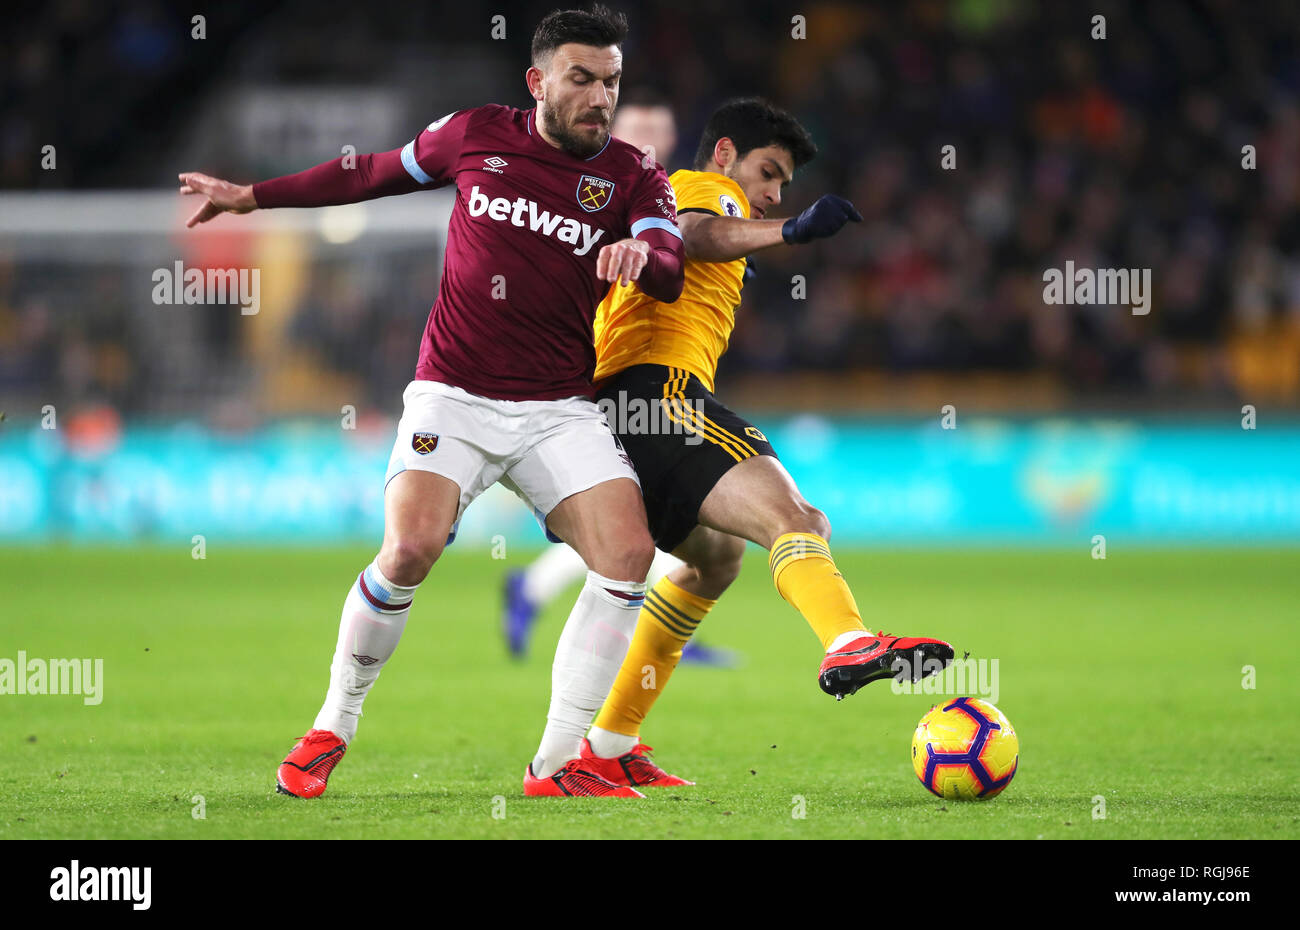 West Ham United's Robert Snodgrass (left) and Wolverhampton Wanderers' Raul Jimenez battle for the ball during the Premier League match at Molineux, Wolverhampton. Stock Photo